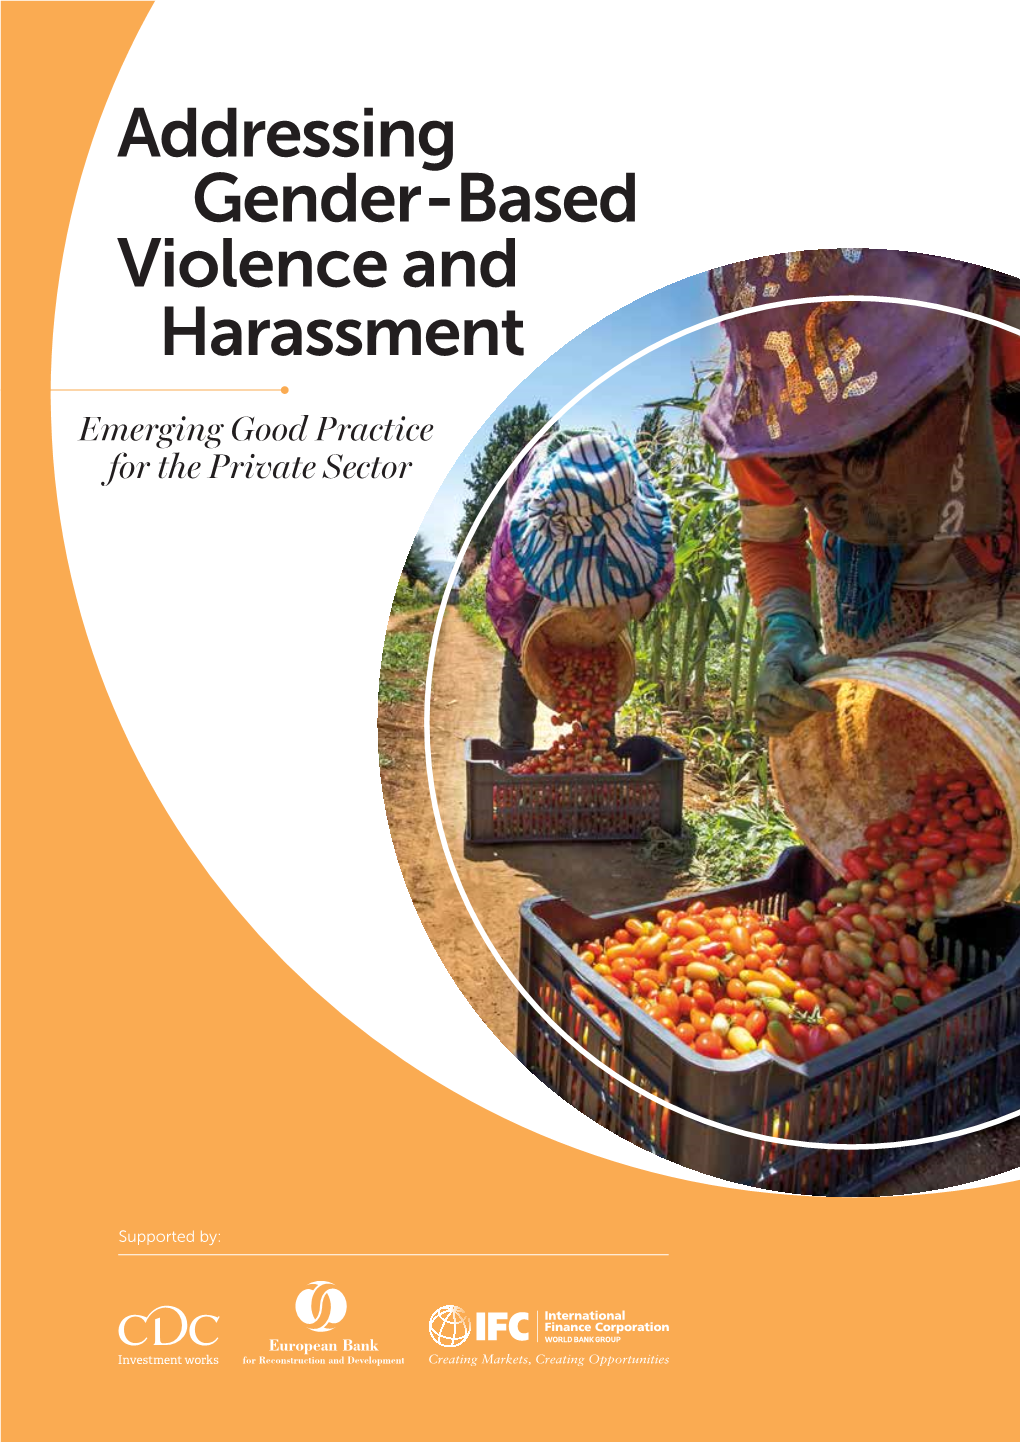 Addressing Gender-Based Violence and Harassment: Emerging Good Practice for the Private Sector